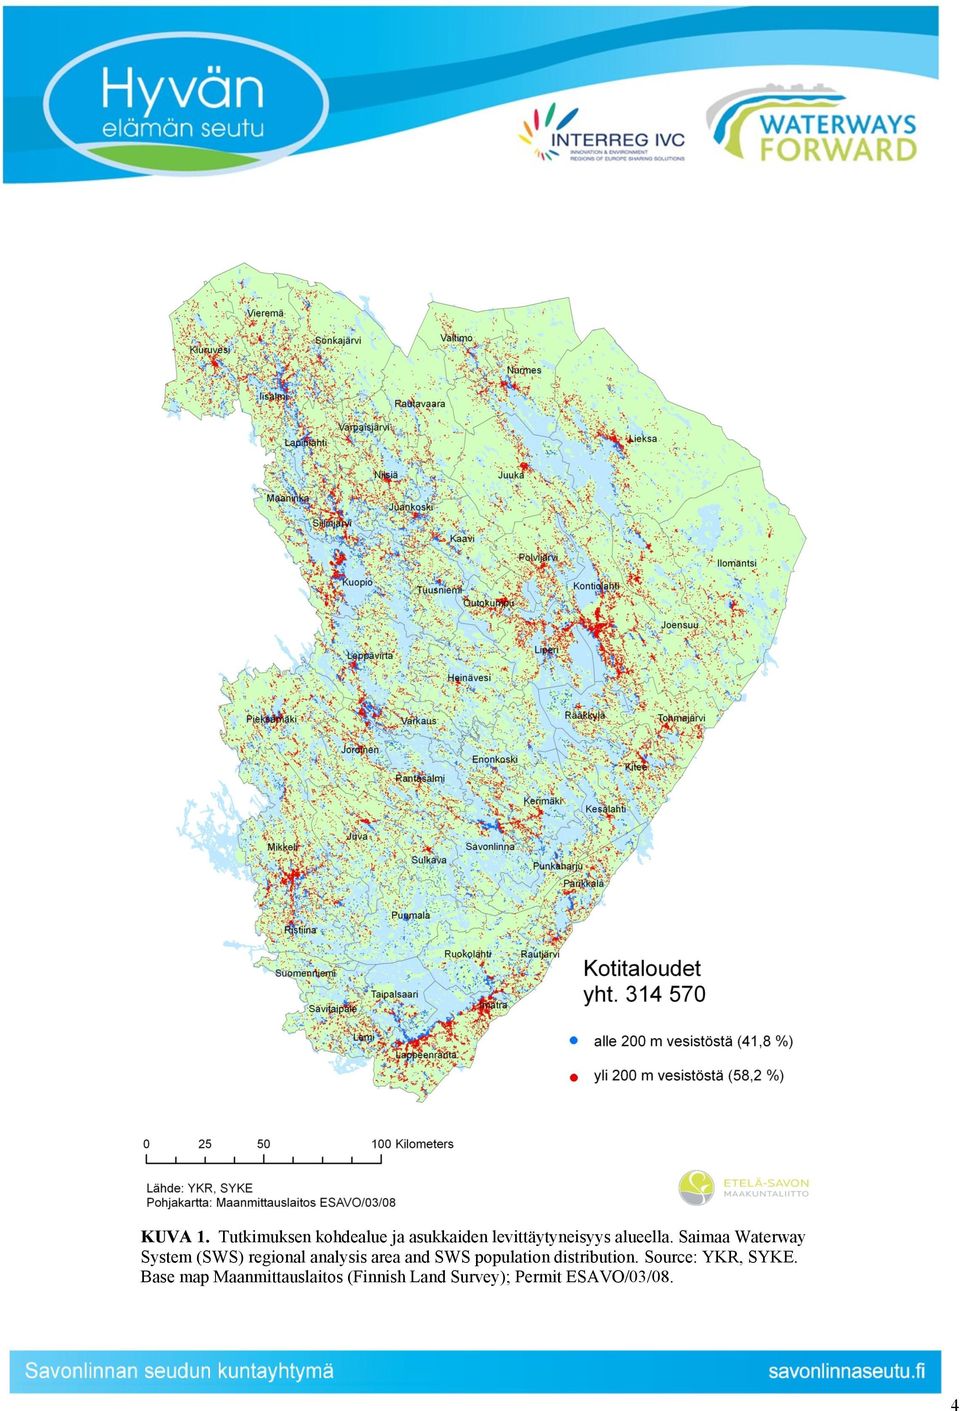 Saimaa Waterway System (SWS) regional analysis area and SWS